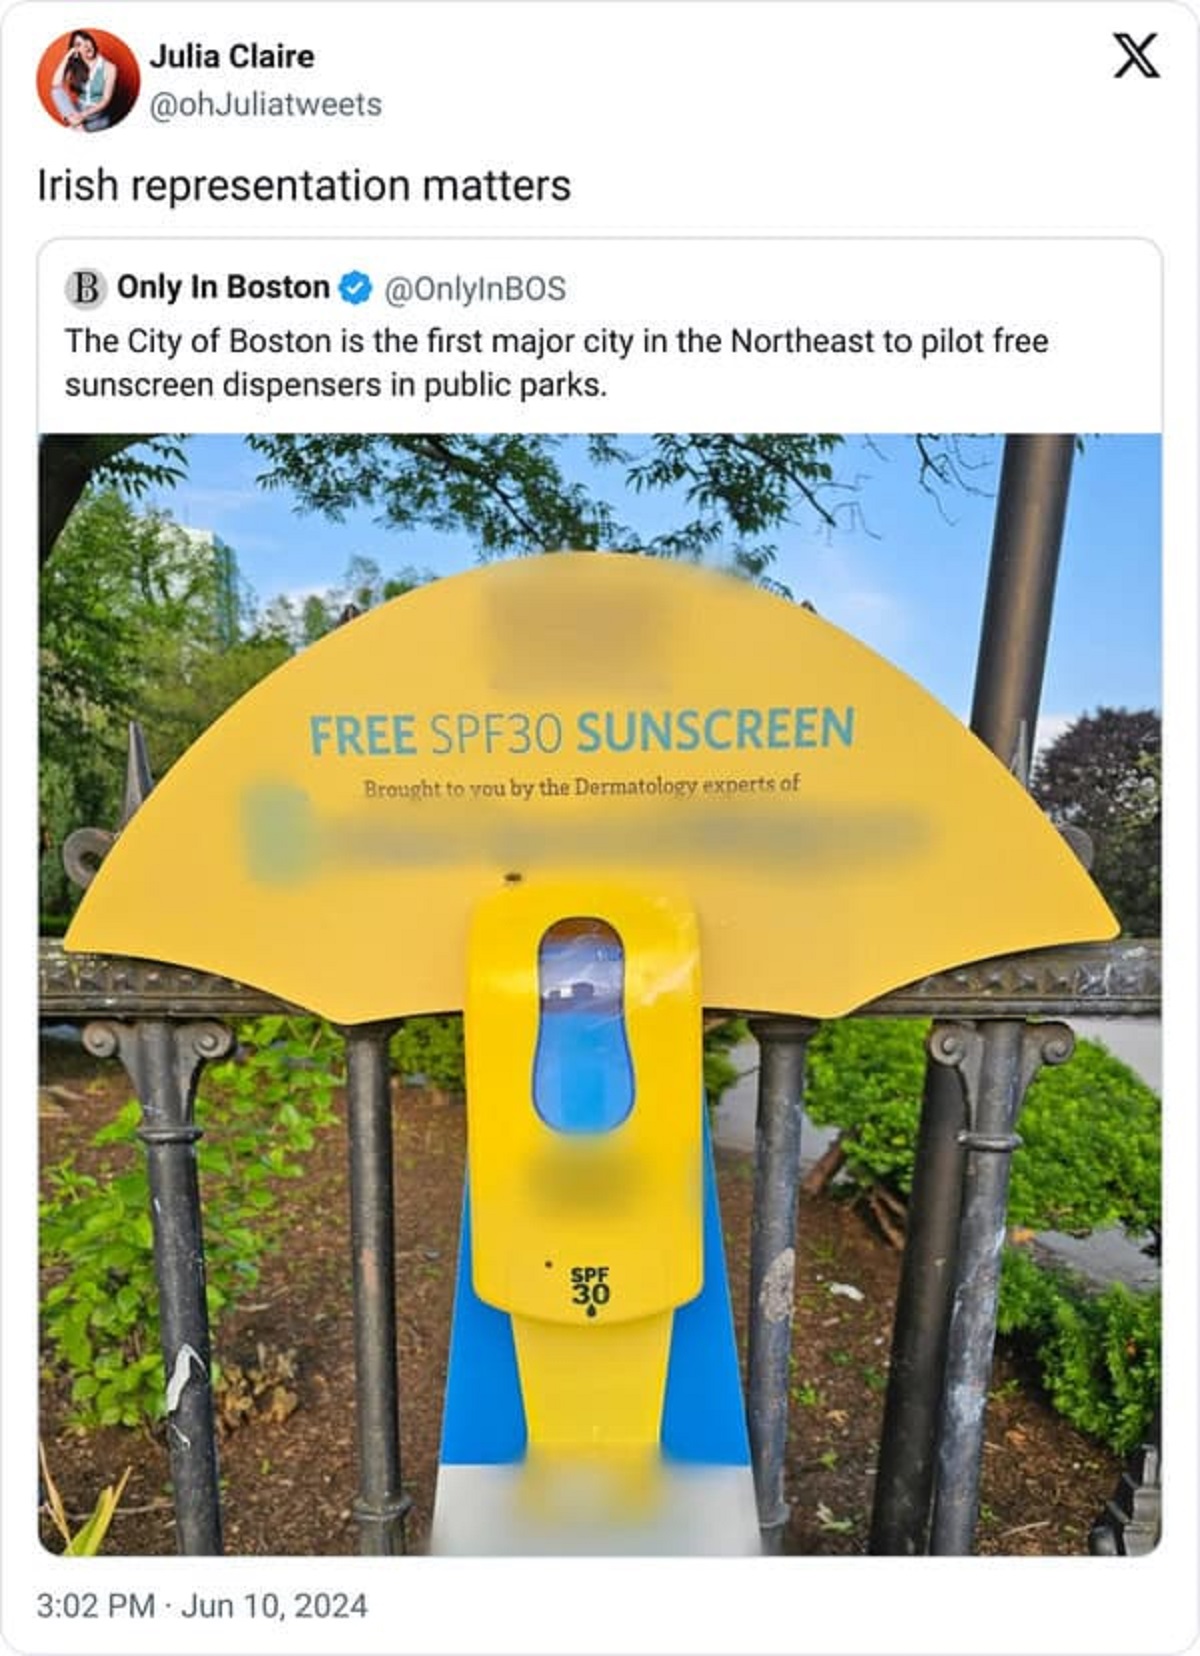 playground - Julia Claire Irish representation matters B Only In Boston The City of Boston is the first major city in the Northeast to pilot free sunscreen dispensers in public parks. Free SPF30 Sunscreen Brought to you by the Dermatology experts of Spf 3